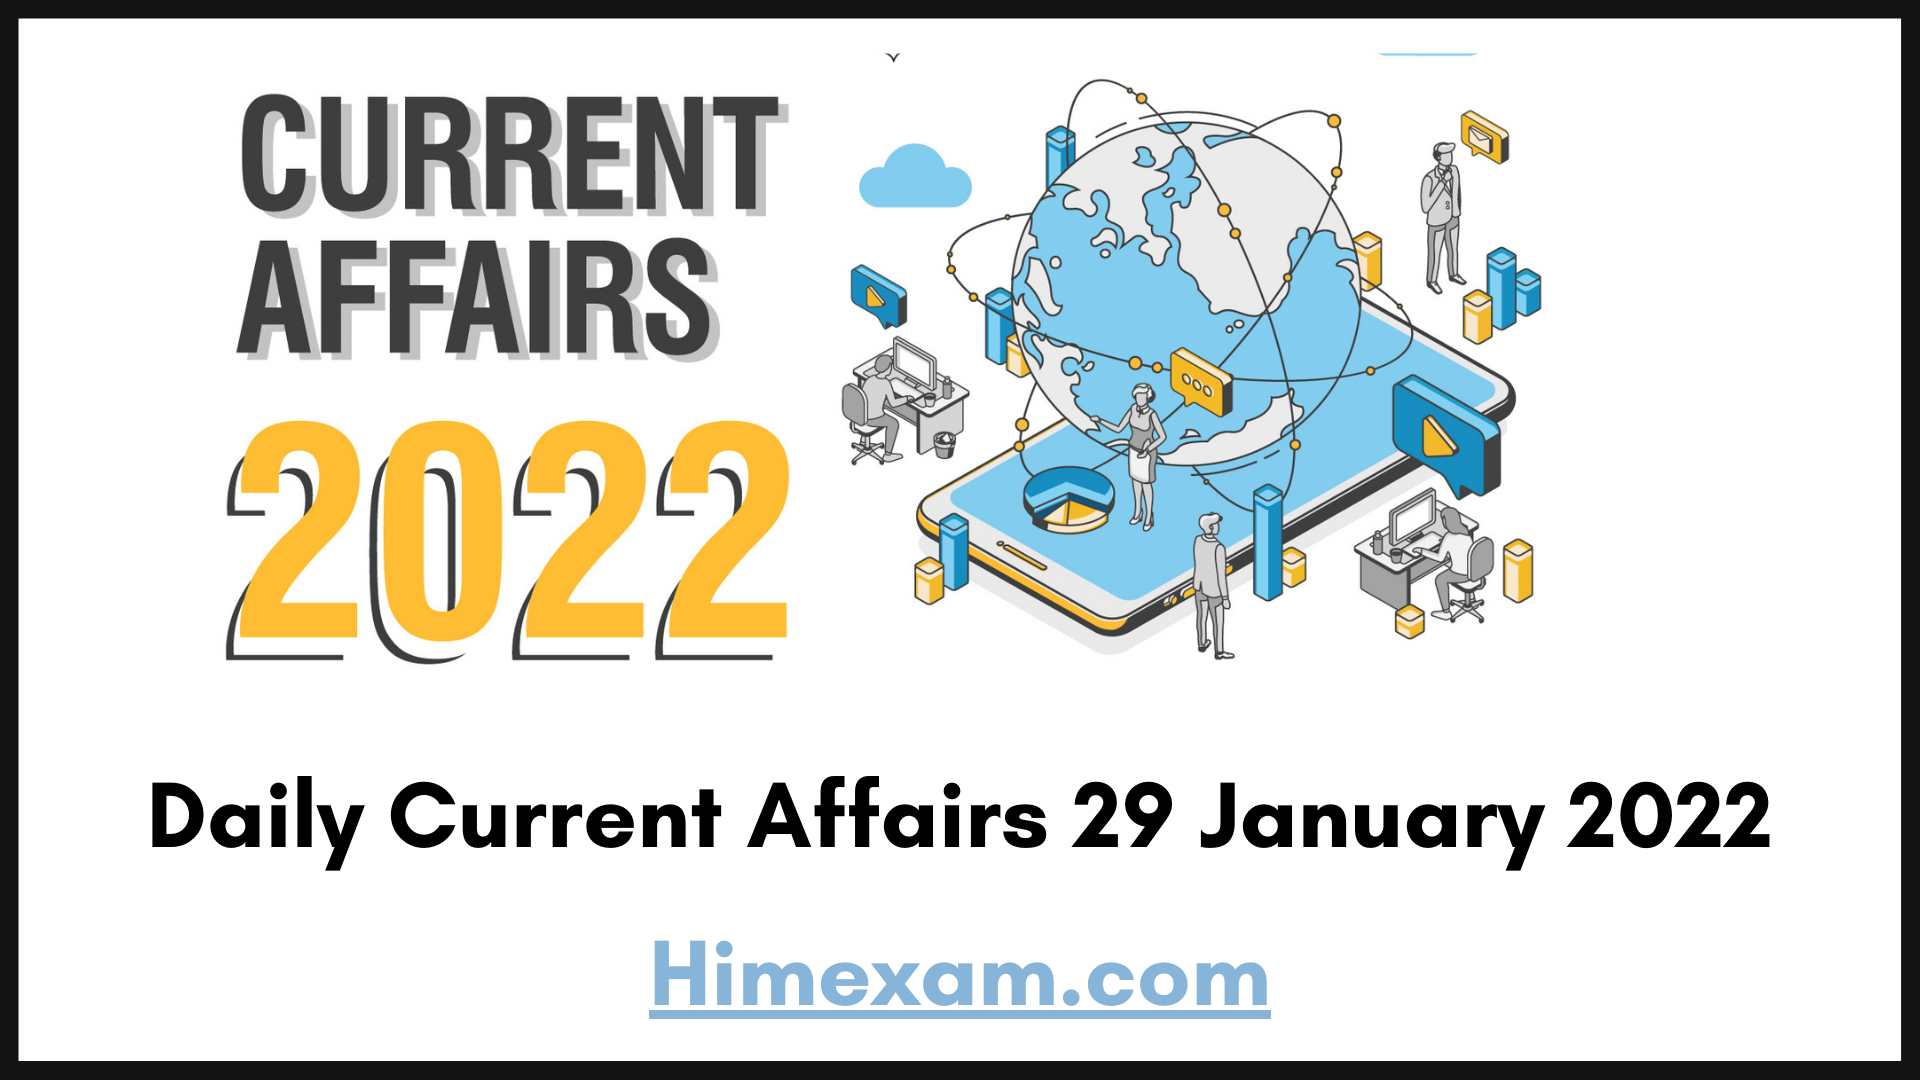 Daily Current Affairs 29 January 2022